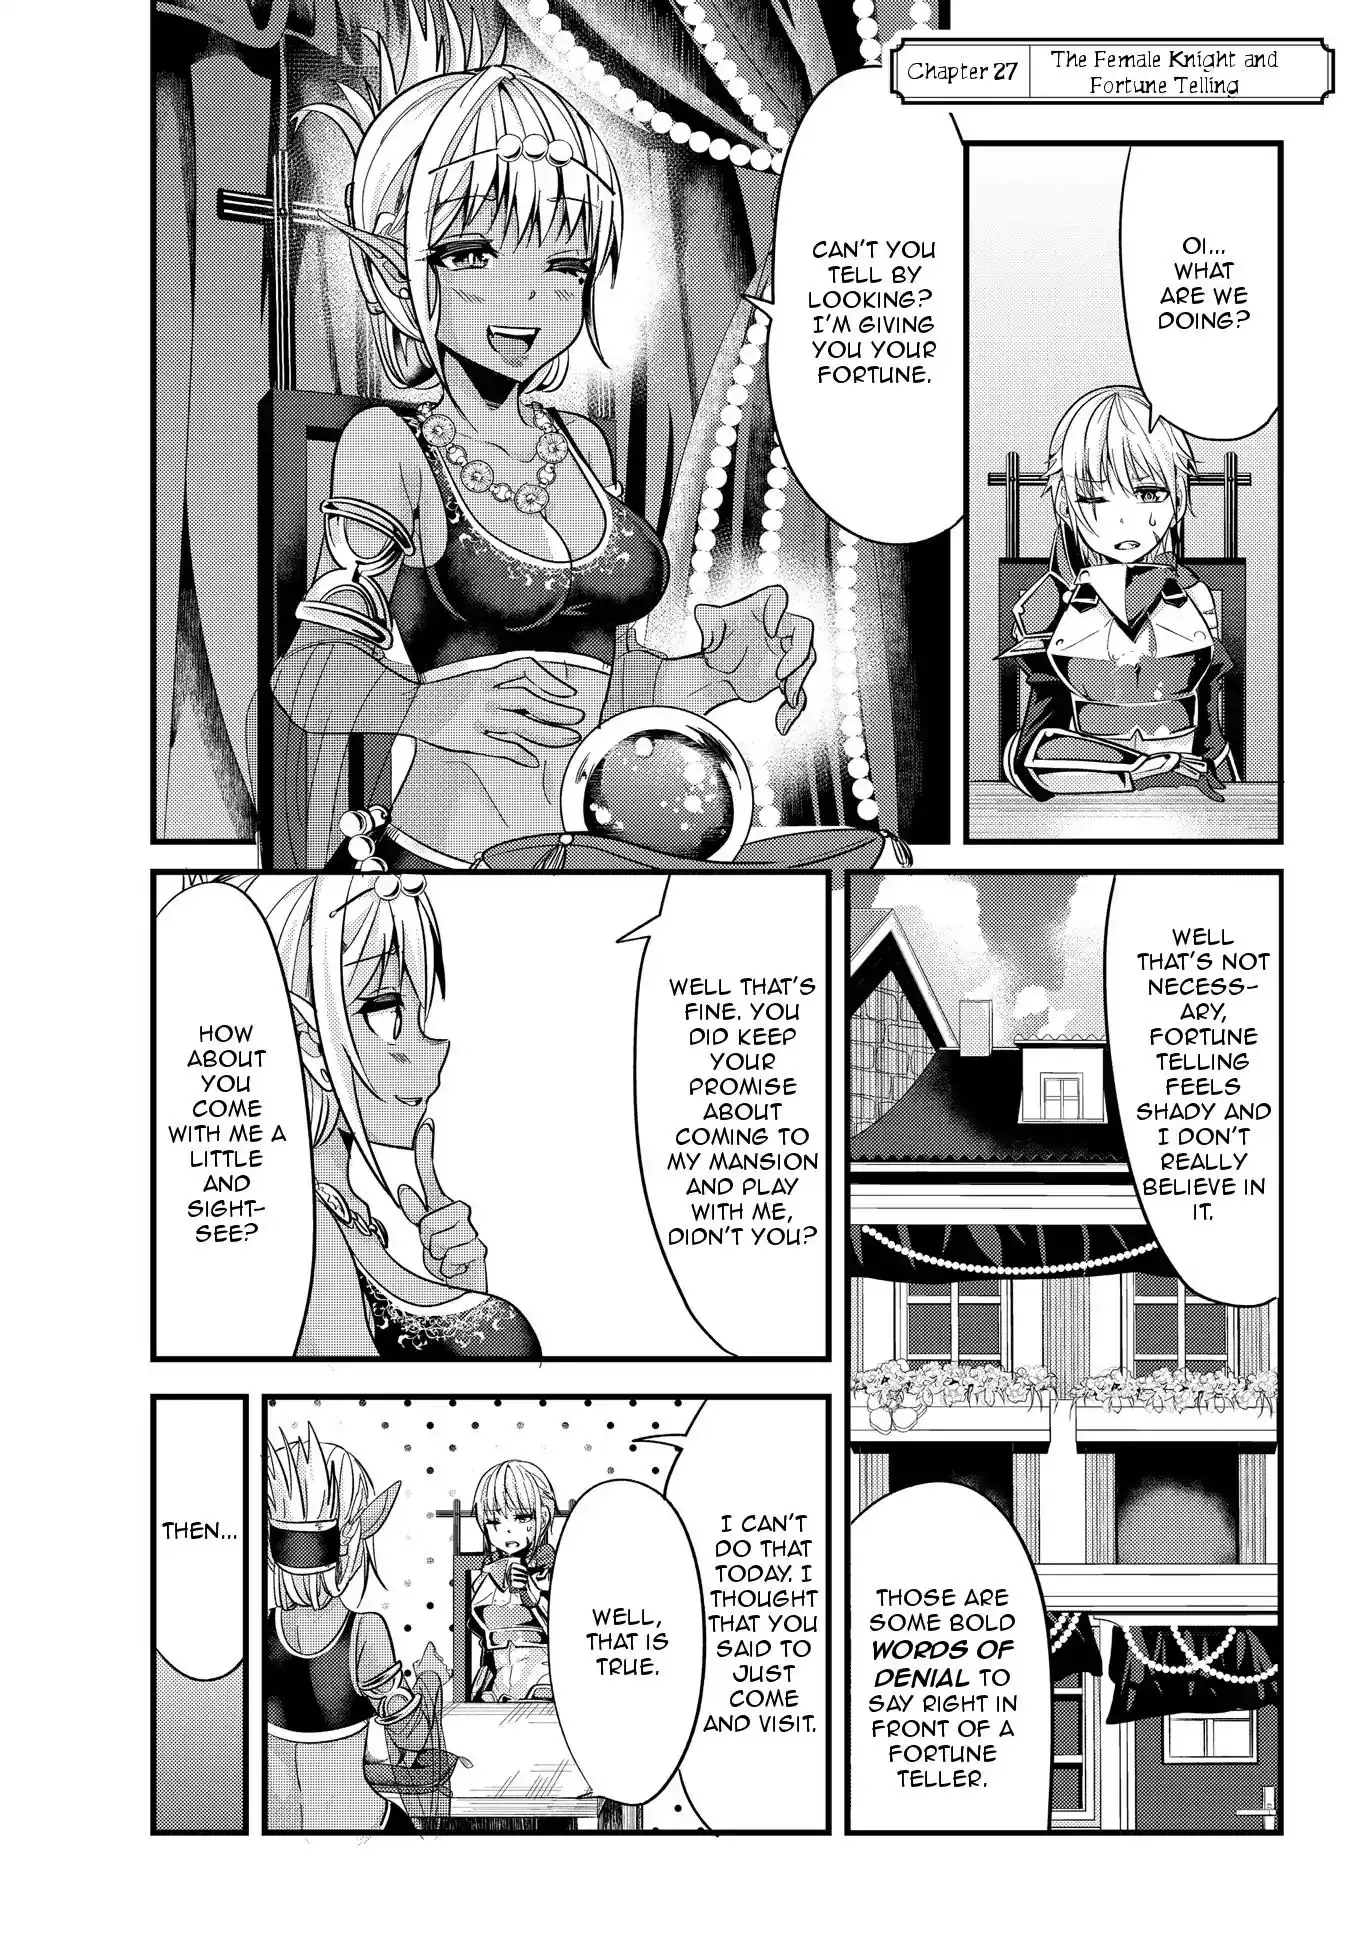 A Story About Treating a Female Knight, Who Has Never Been Treated as a Woman, as a Woman - Chapter 27 Page 1